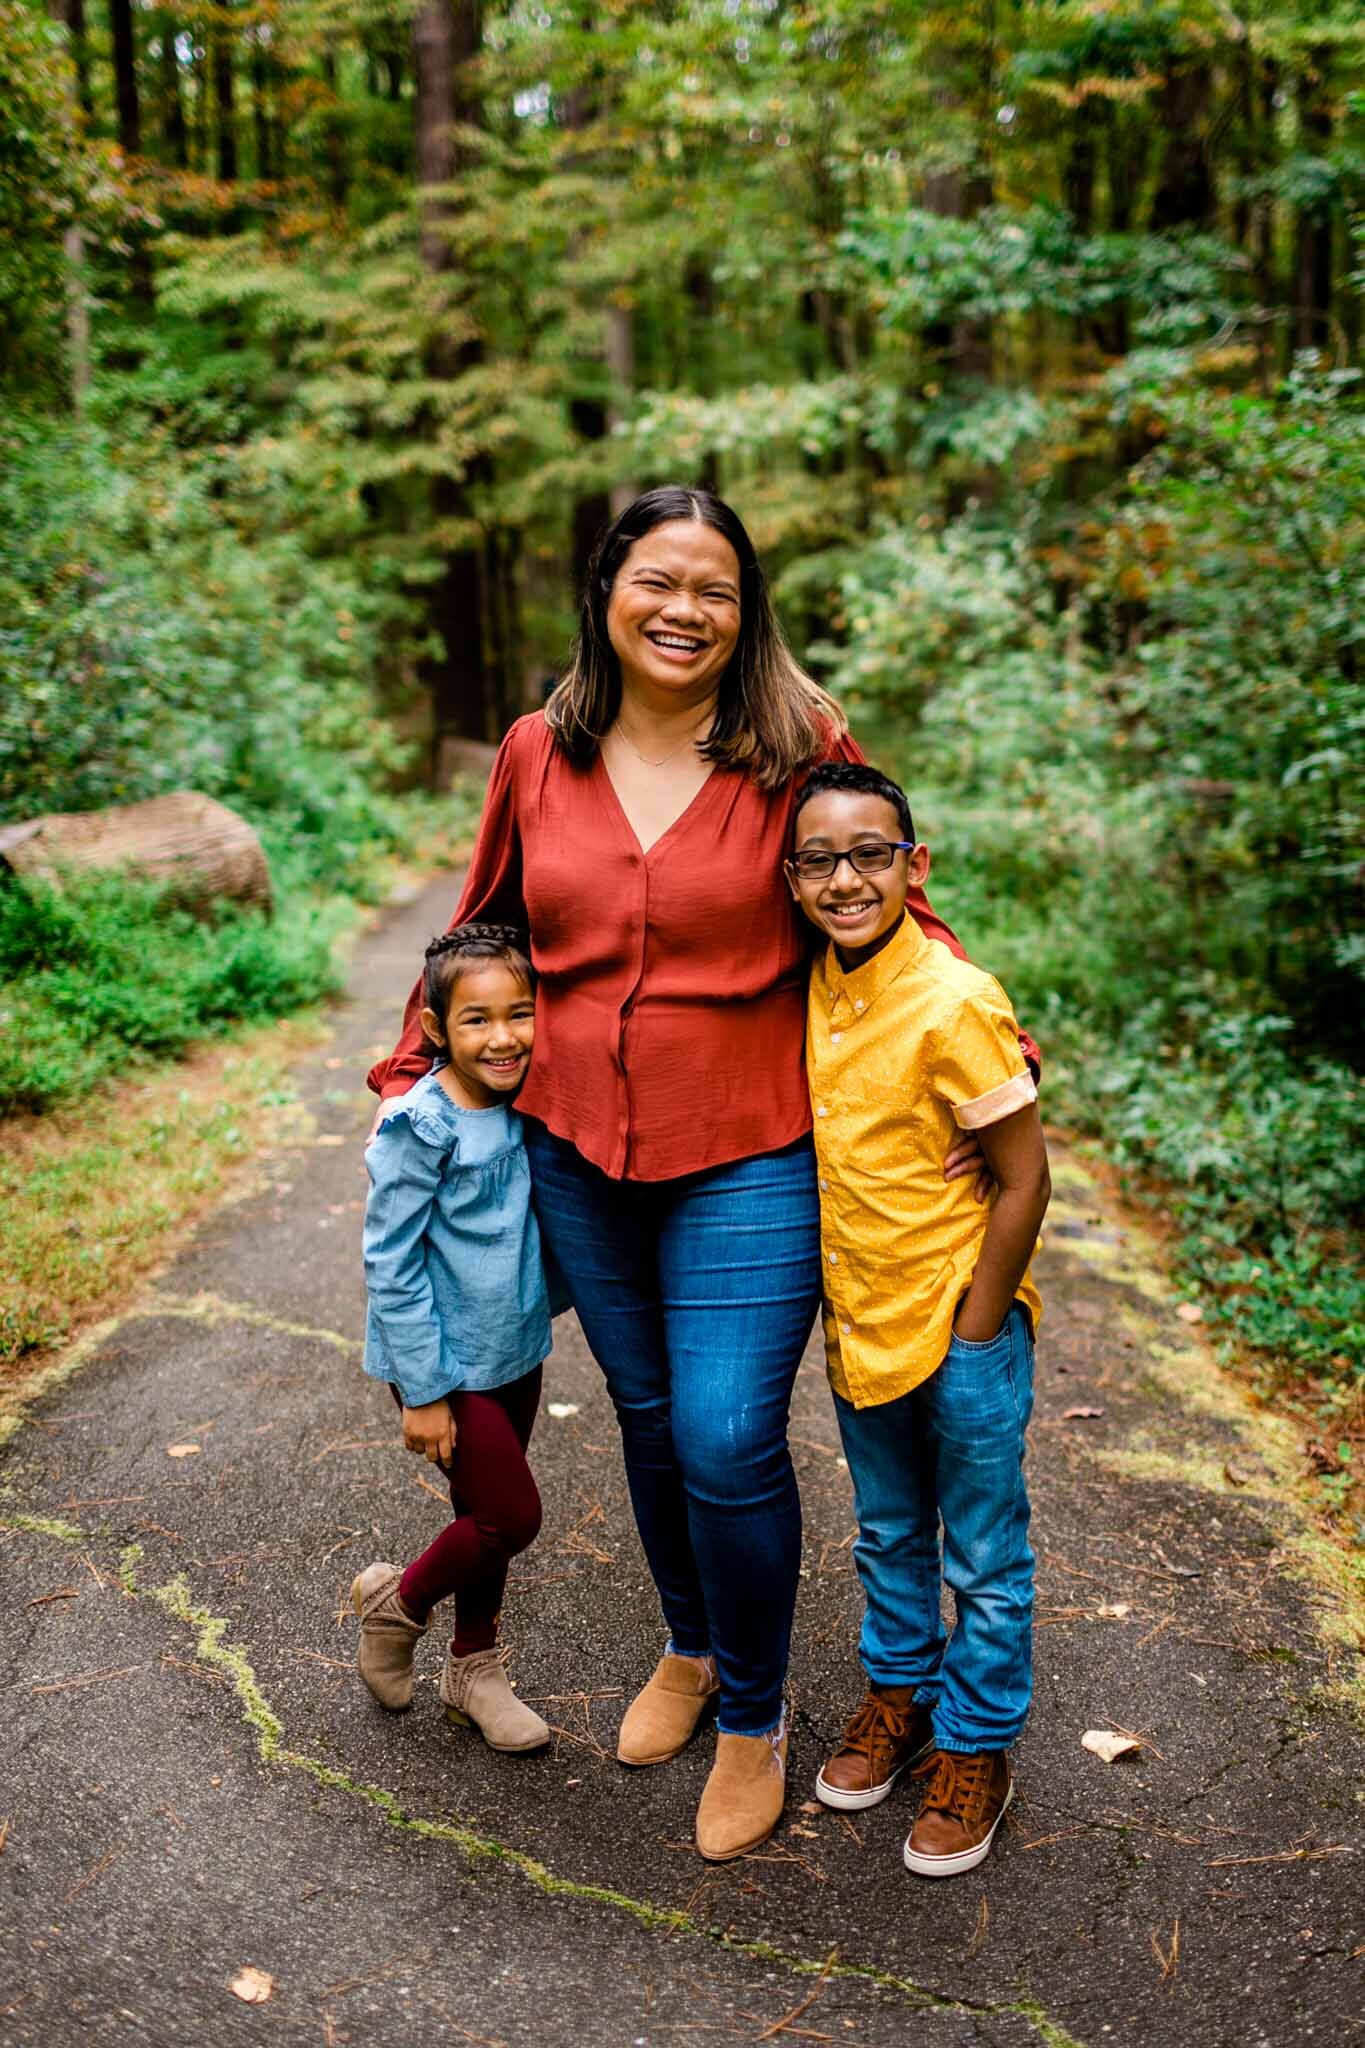 Raleigh Family Photographer | By G. Lin Photography | Umstead Park | Raleigh Family Photographer | By G. Lin Photography | Umstead Park | Aunt with young niece and newphew